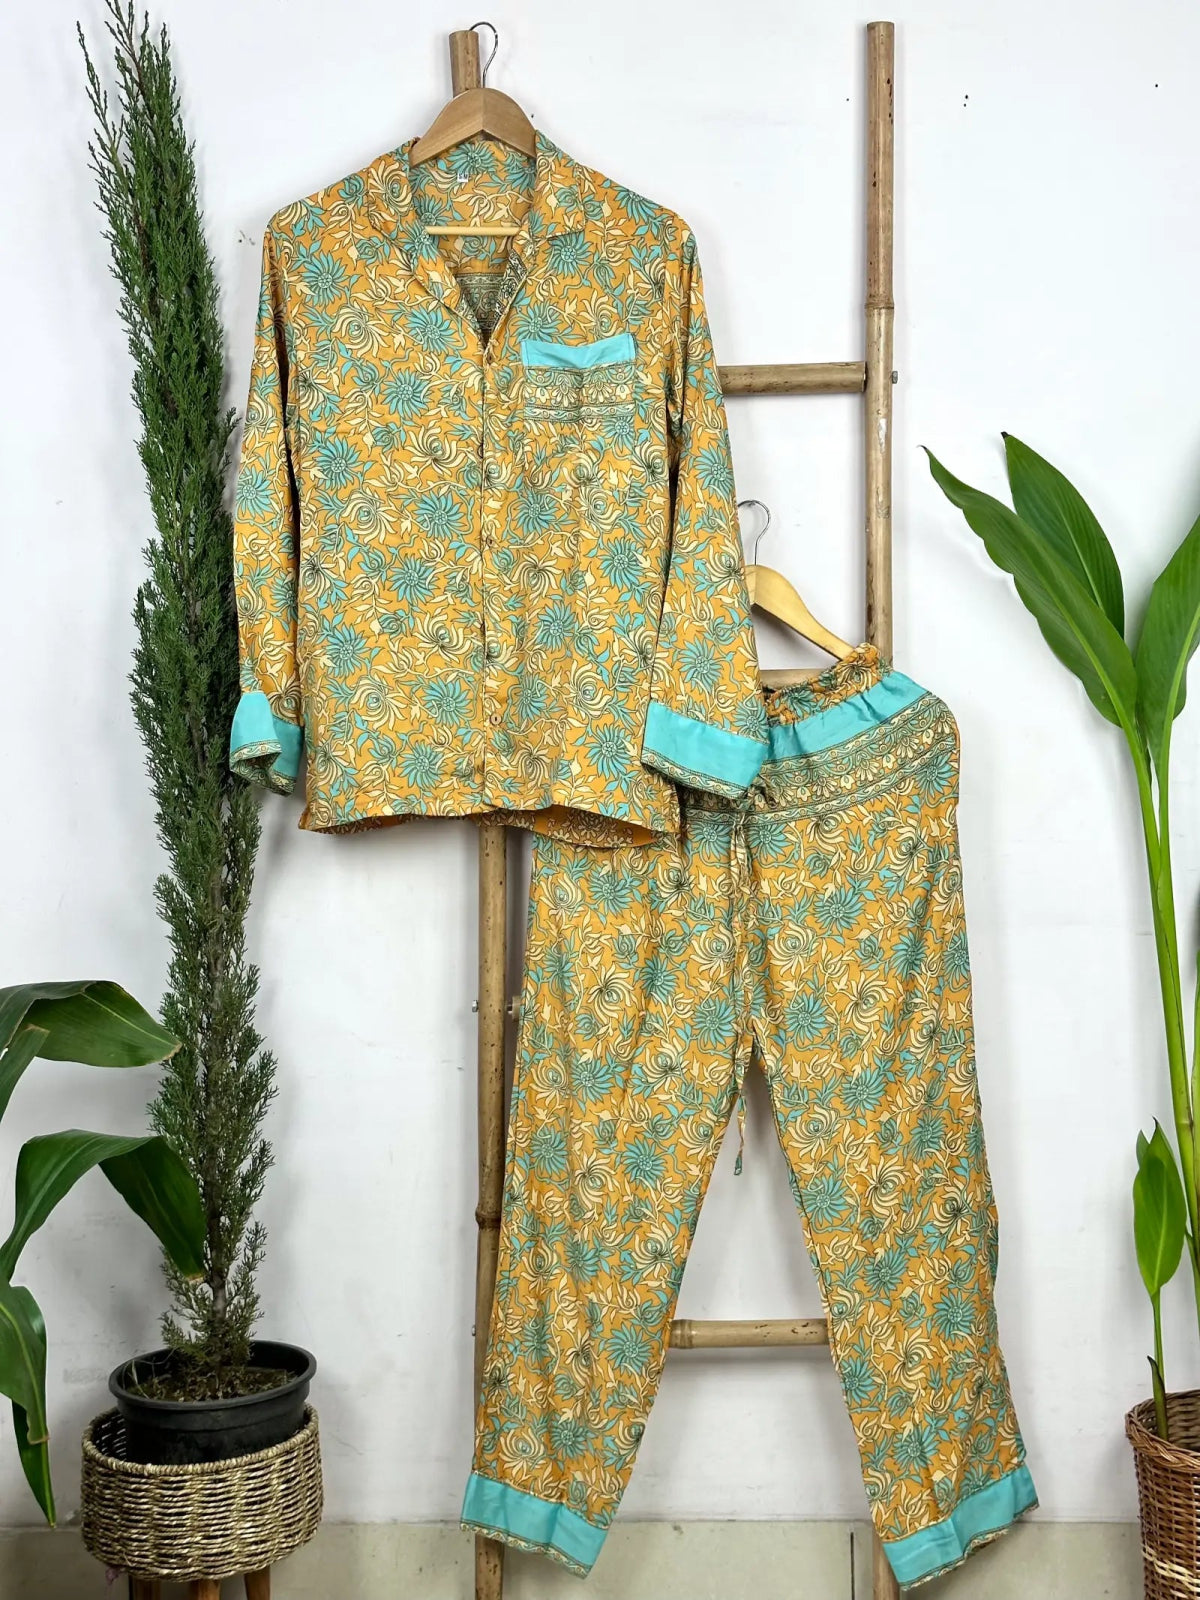 Recycle Silk Long Pajama Set, Lightweight and Breathable PJ Nightwear, Sustainable Women Girly Pajama Sleepwear Set, Silk Top and Bottom Gift for Her | S/M Size - The Eastern Loom